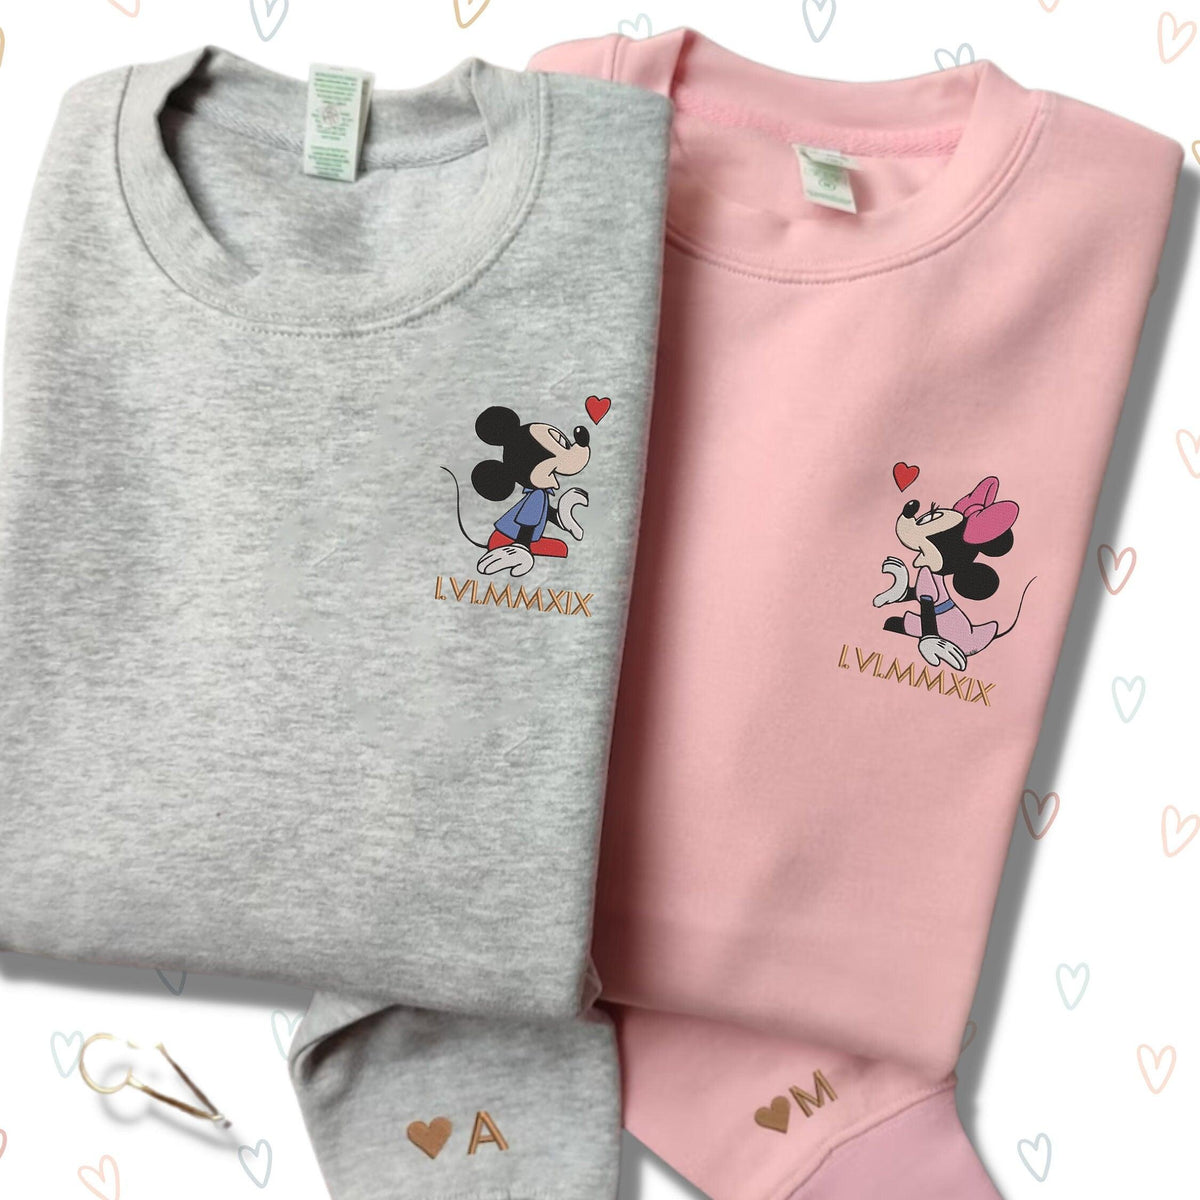 Custom Embroidered Hoodies For Couples, Custom Matching Couple Hoodies, Cartoon Mouse Heart Roman Numeral Date Embroidered Matching Couples Hoodie